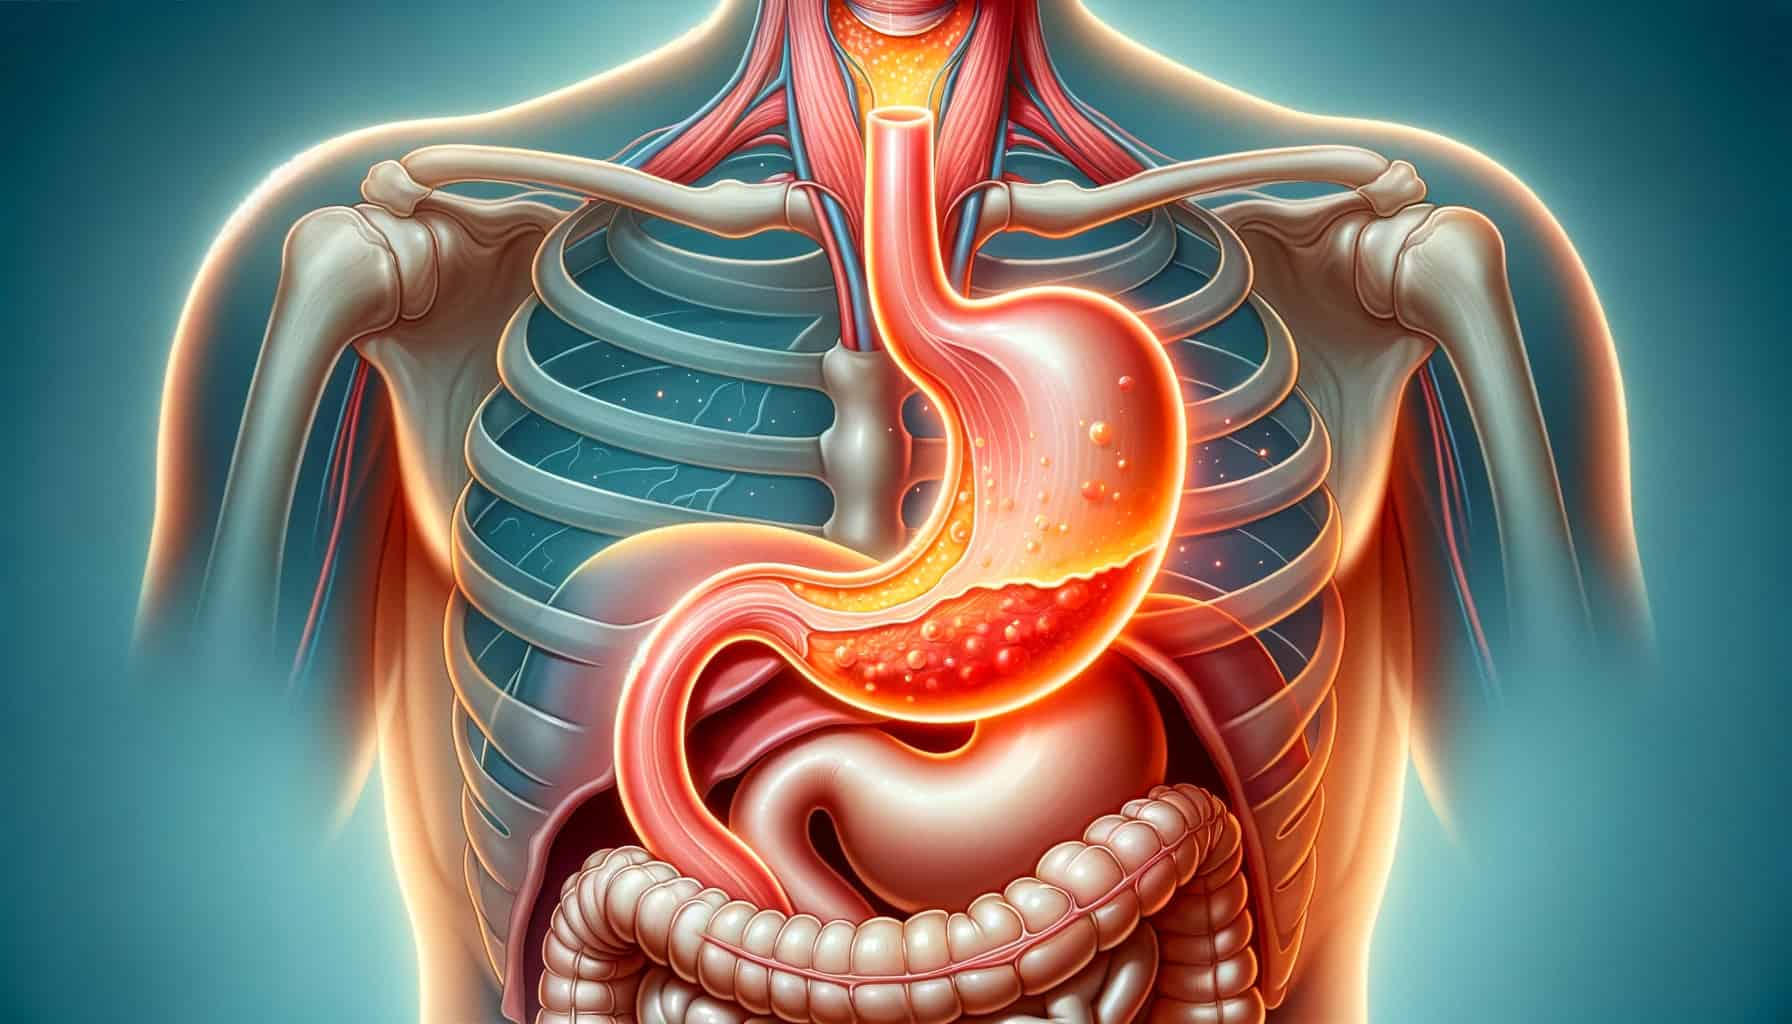 Depicting acid reflux, in a clear and educational manner. Jpg